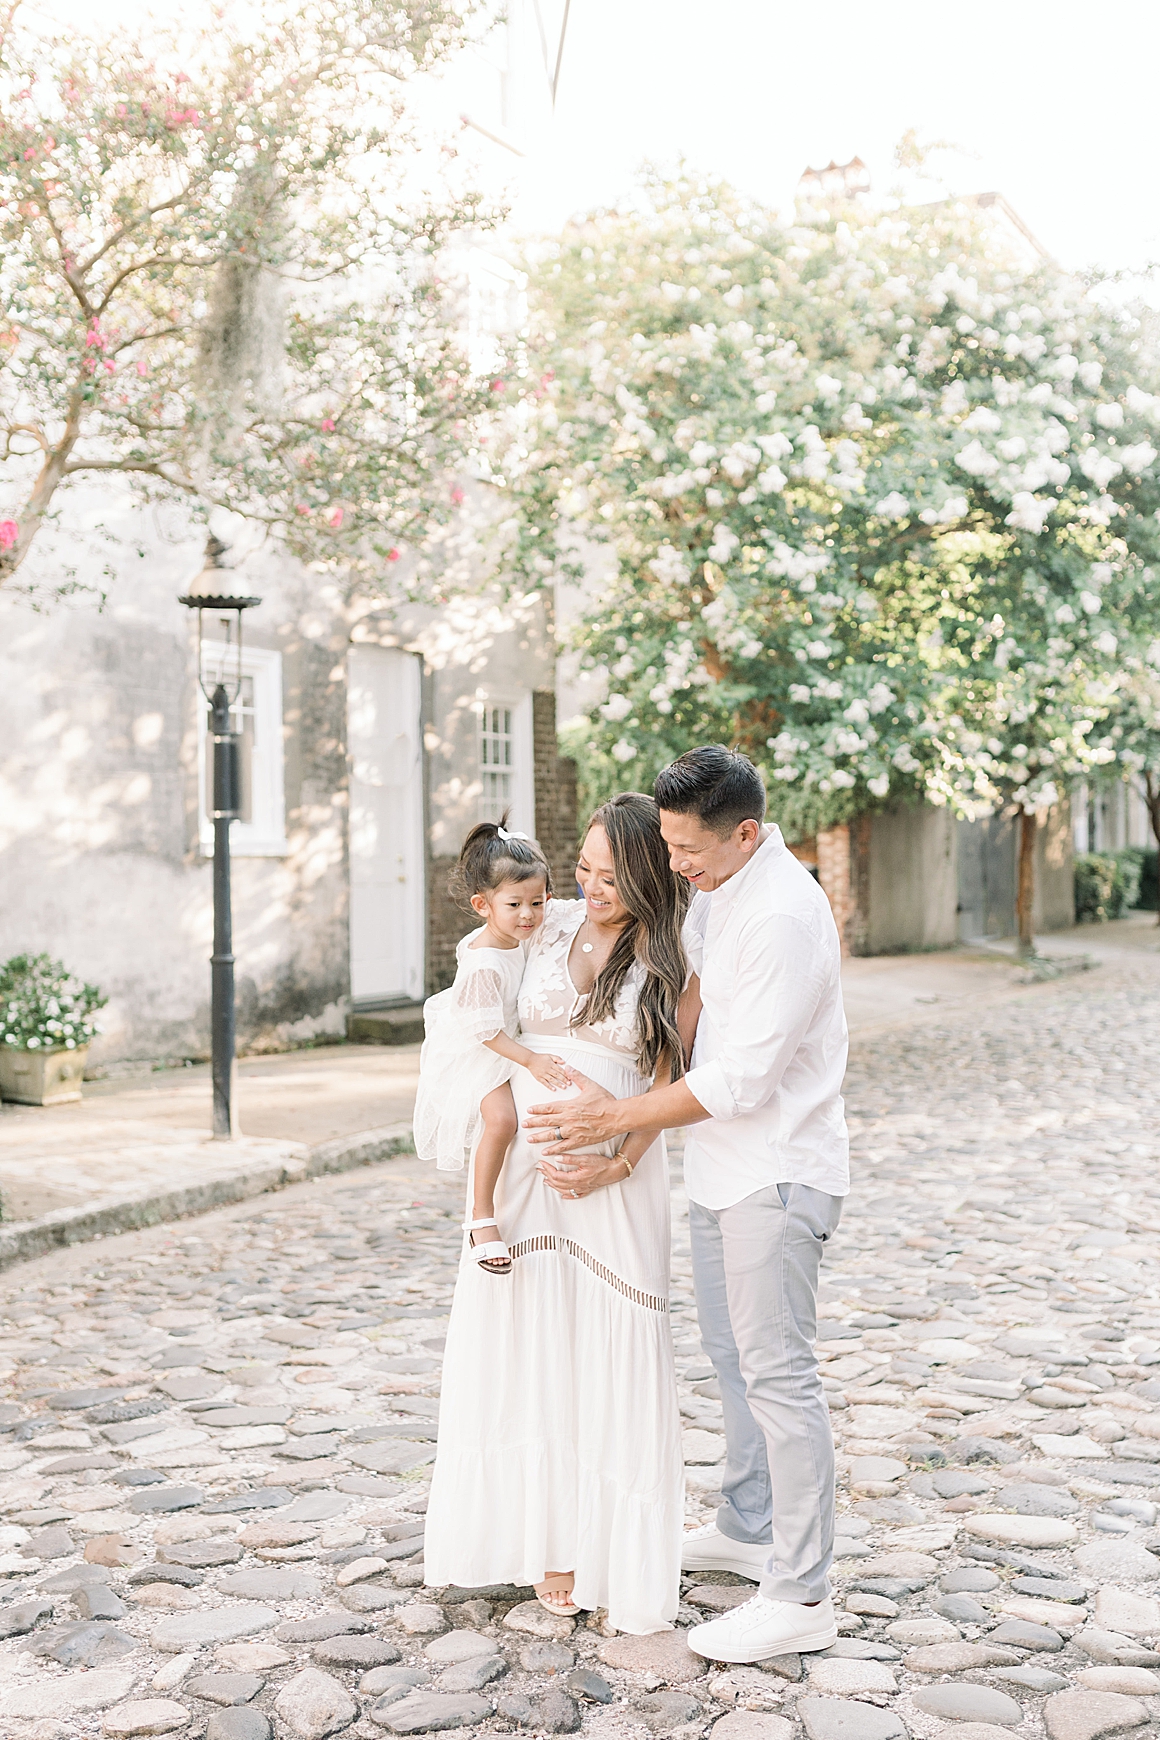 Maternity session in Downtown Charleston on the cobblestone streets. Photos by Caitlyn Motycka Photography.